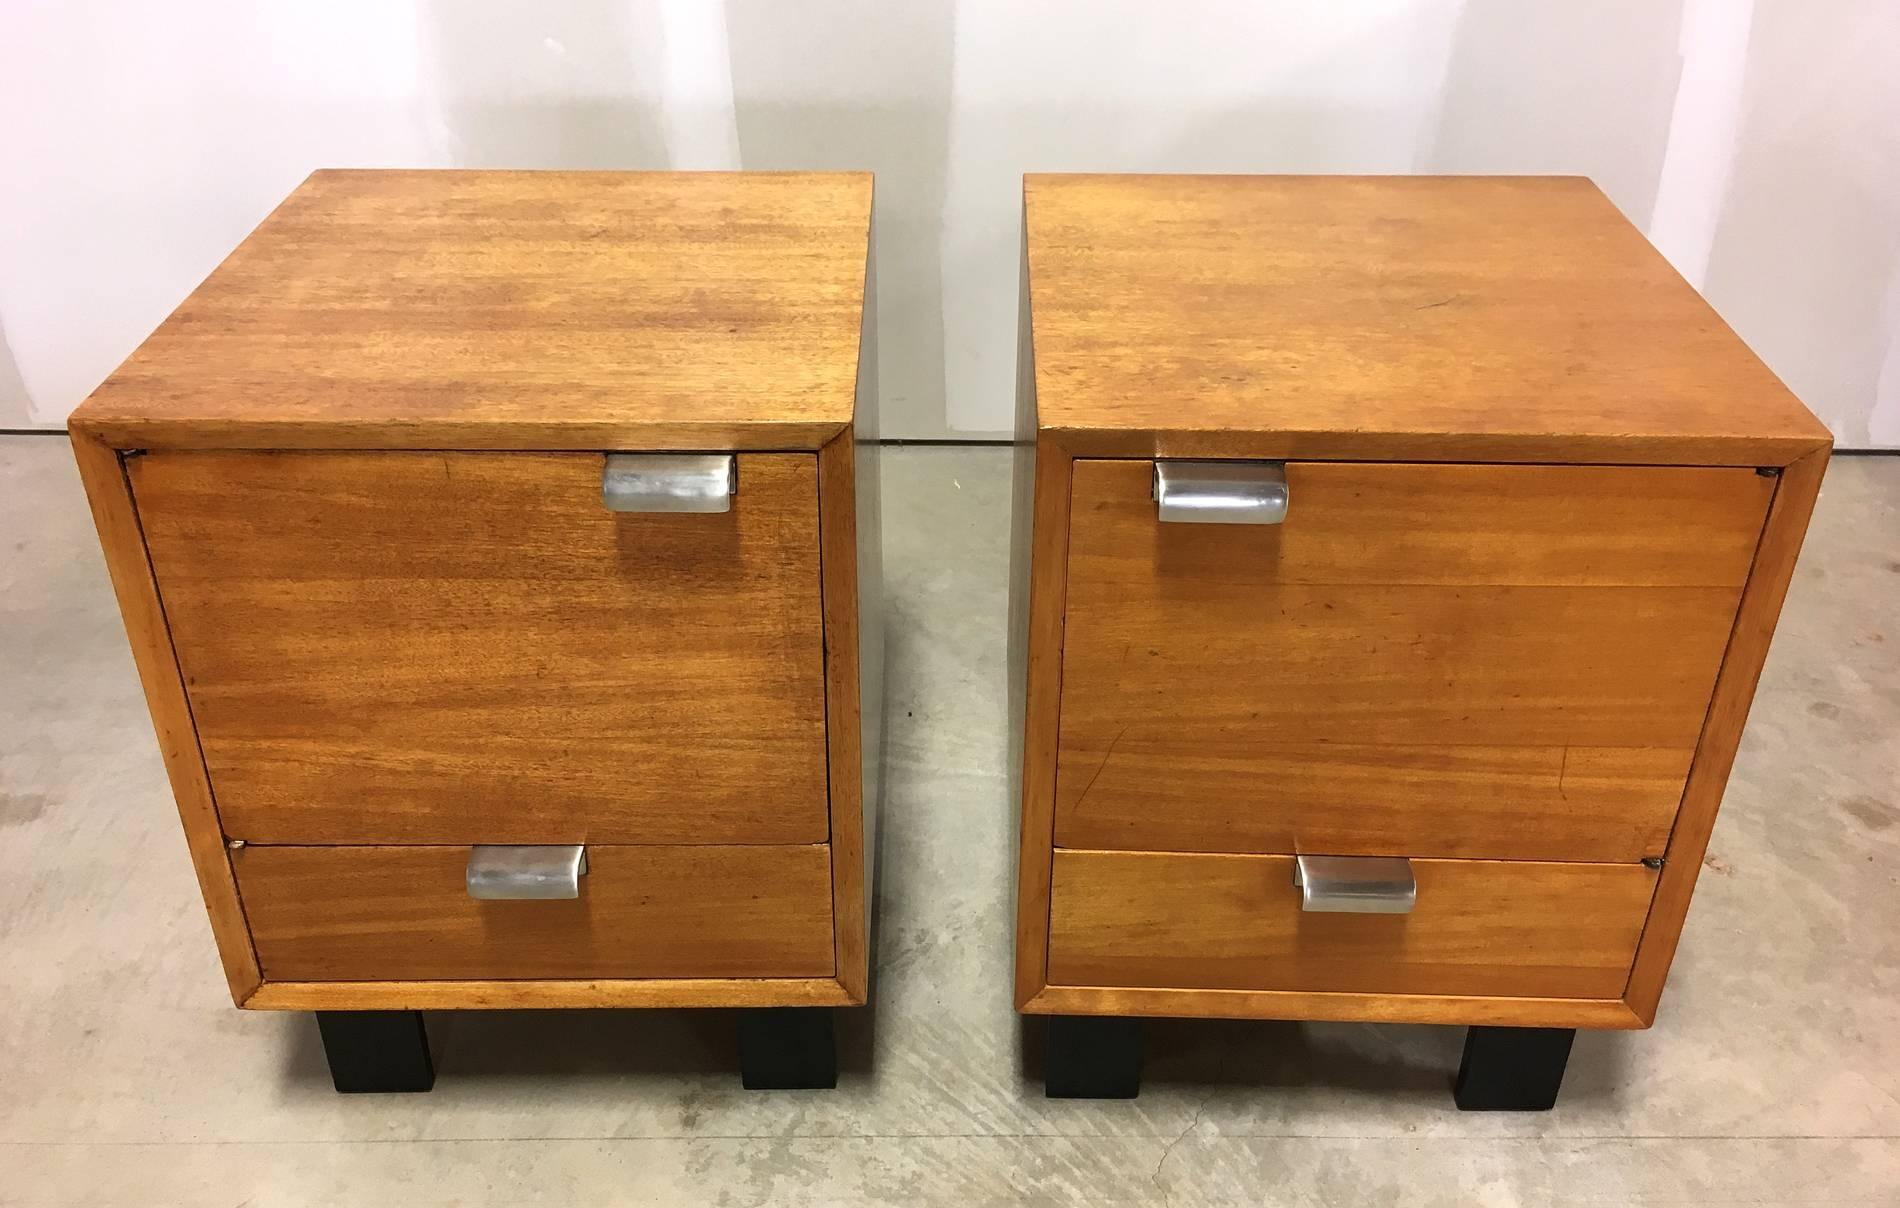 Pair of early George Nelson for Herman Miller Primavera bedside cabinets, #1407. Circa late 1940s-early 1950s. The cabinets each feature a door that opens for storage, with a single drawer below, with Classic Nelson chrome pulls. The base of the